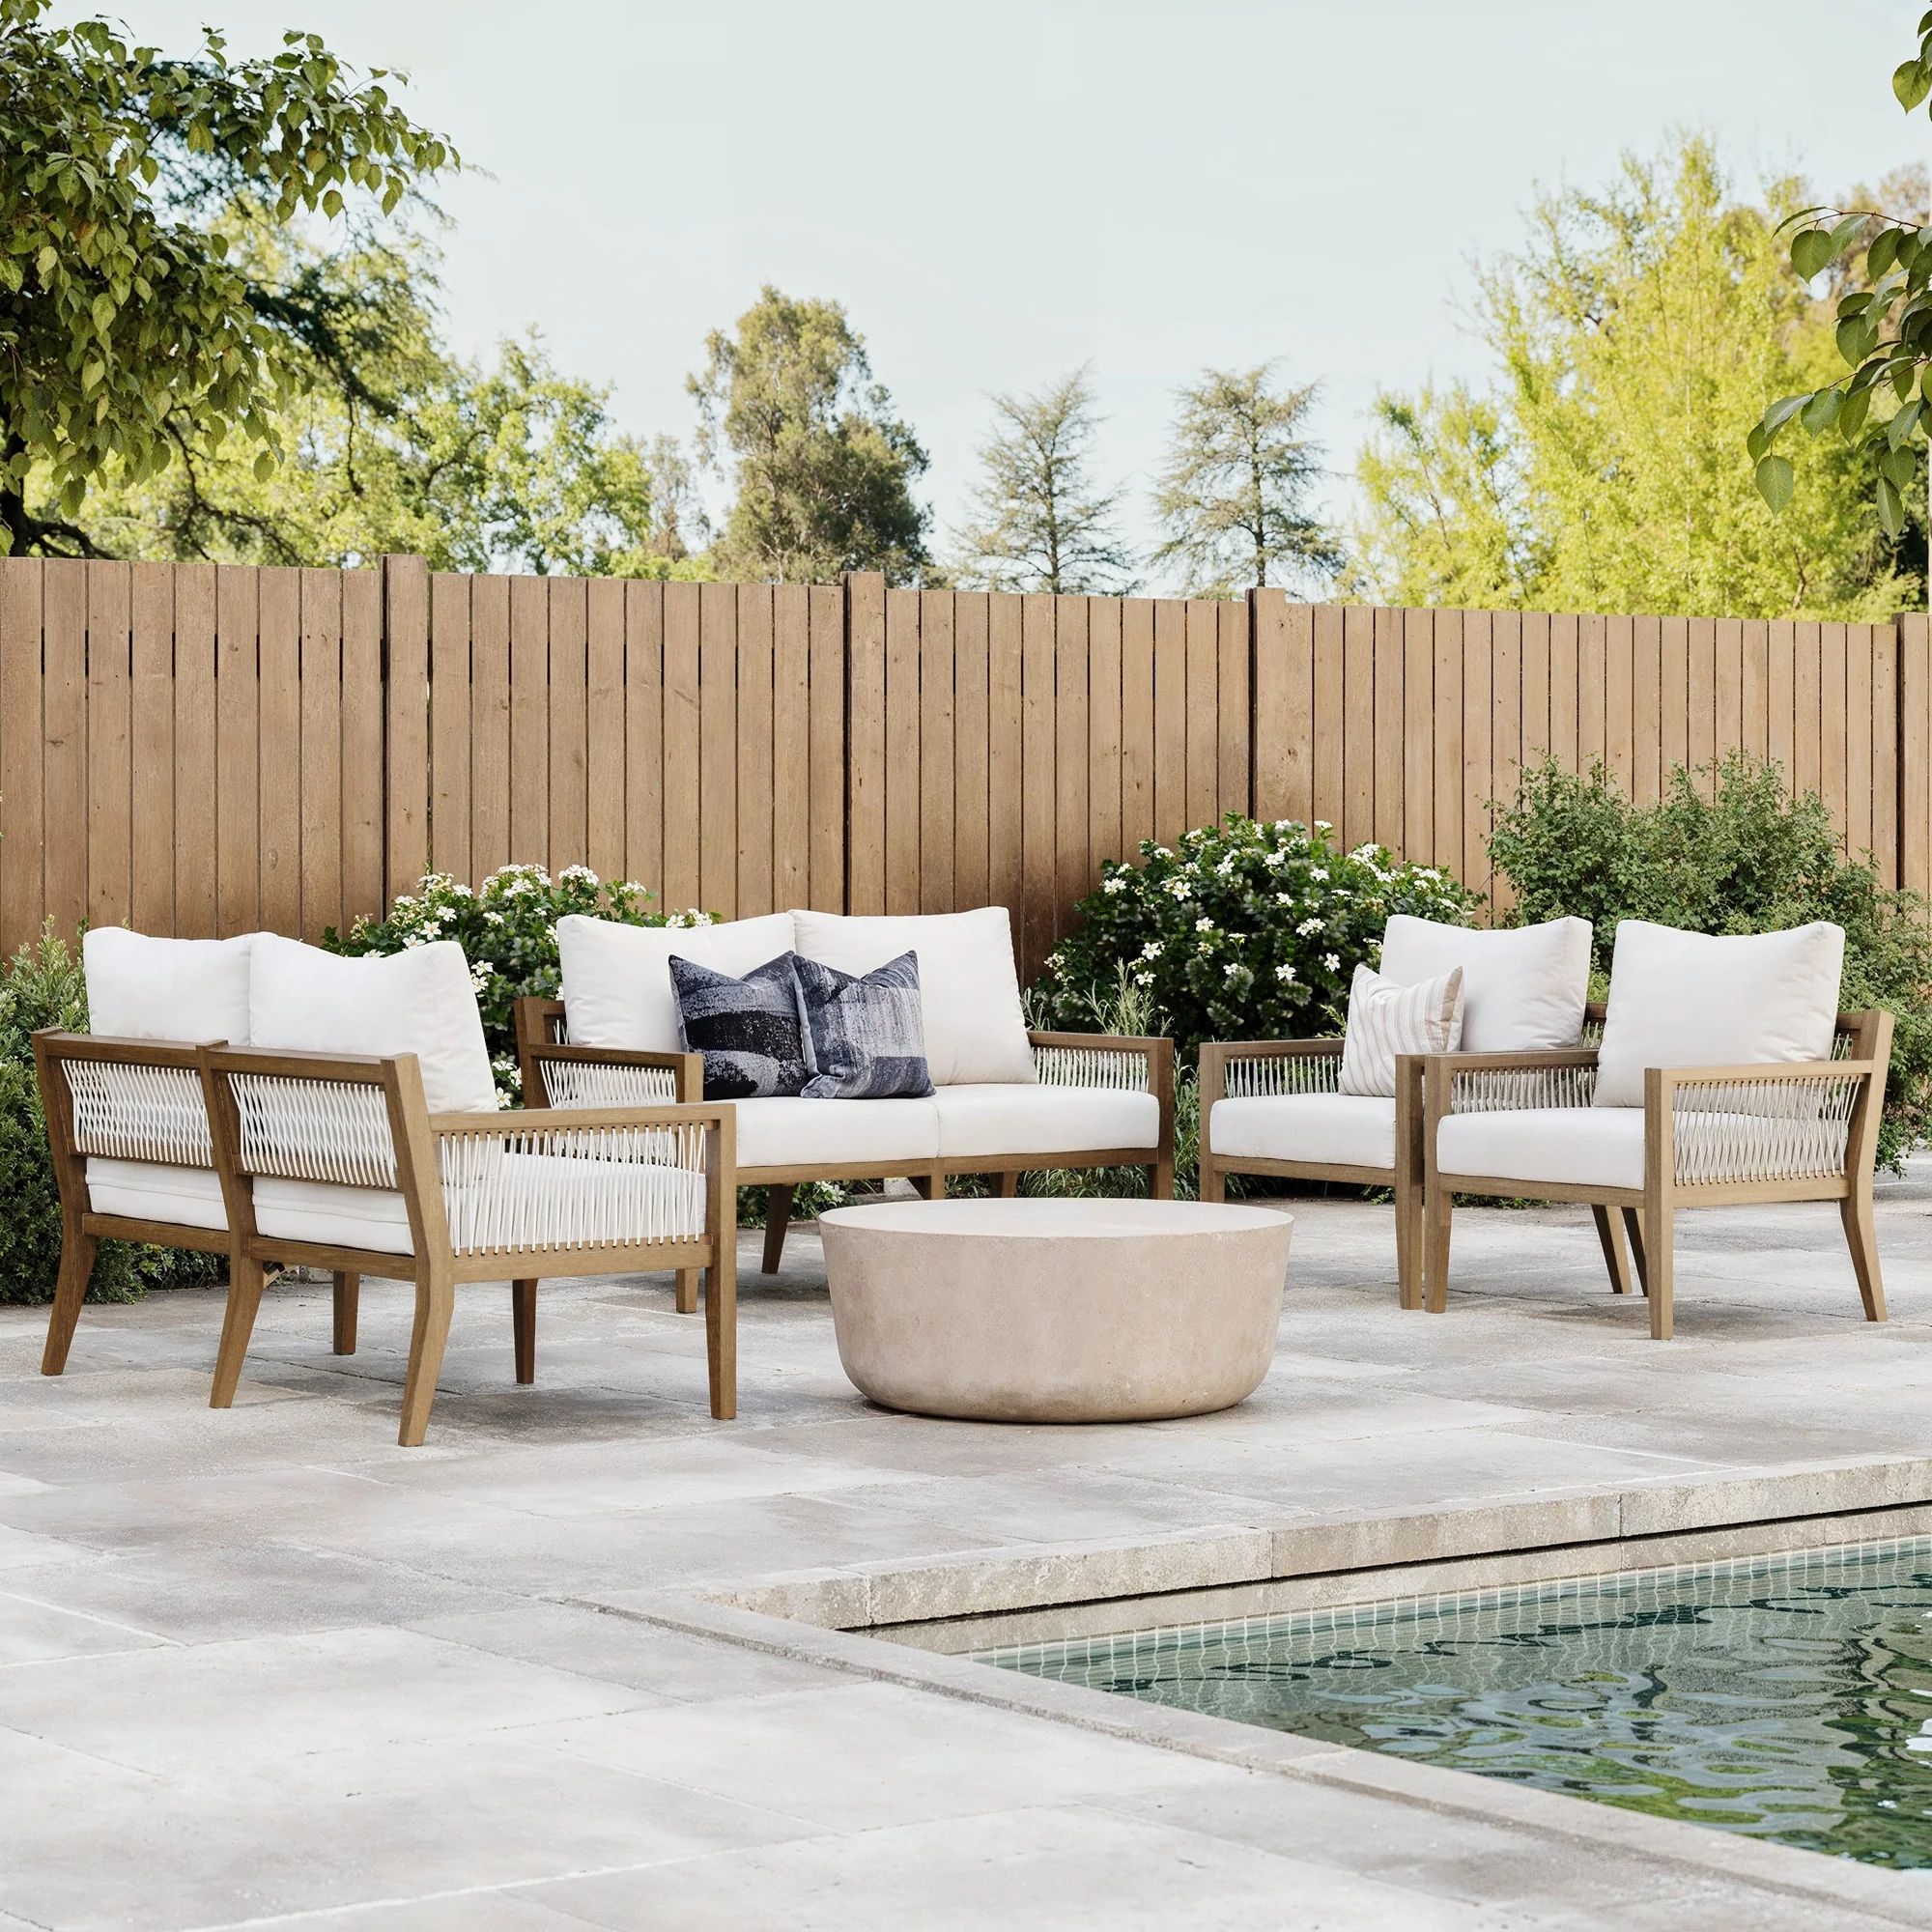 Set of 2 Outdoor Loveseats & 2 Chairs White | Nathan James